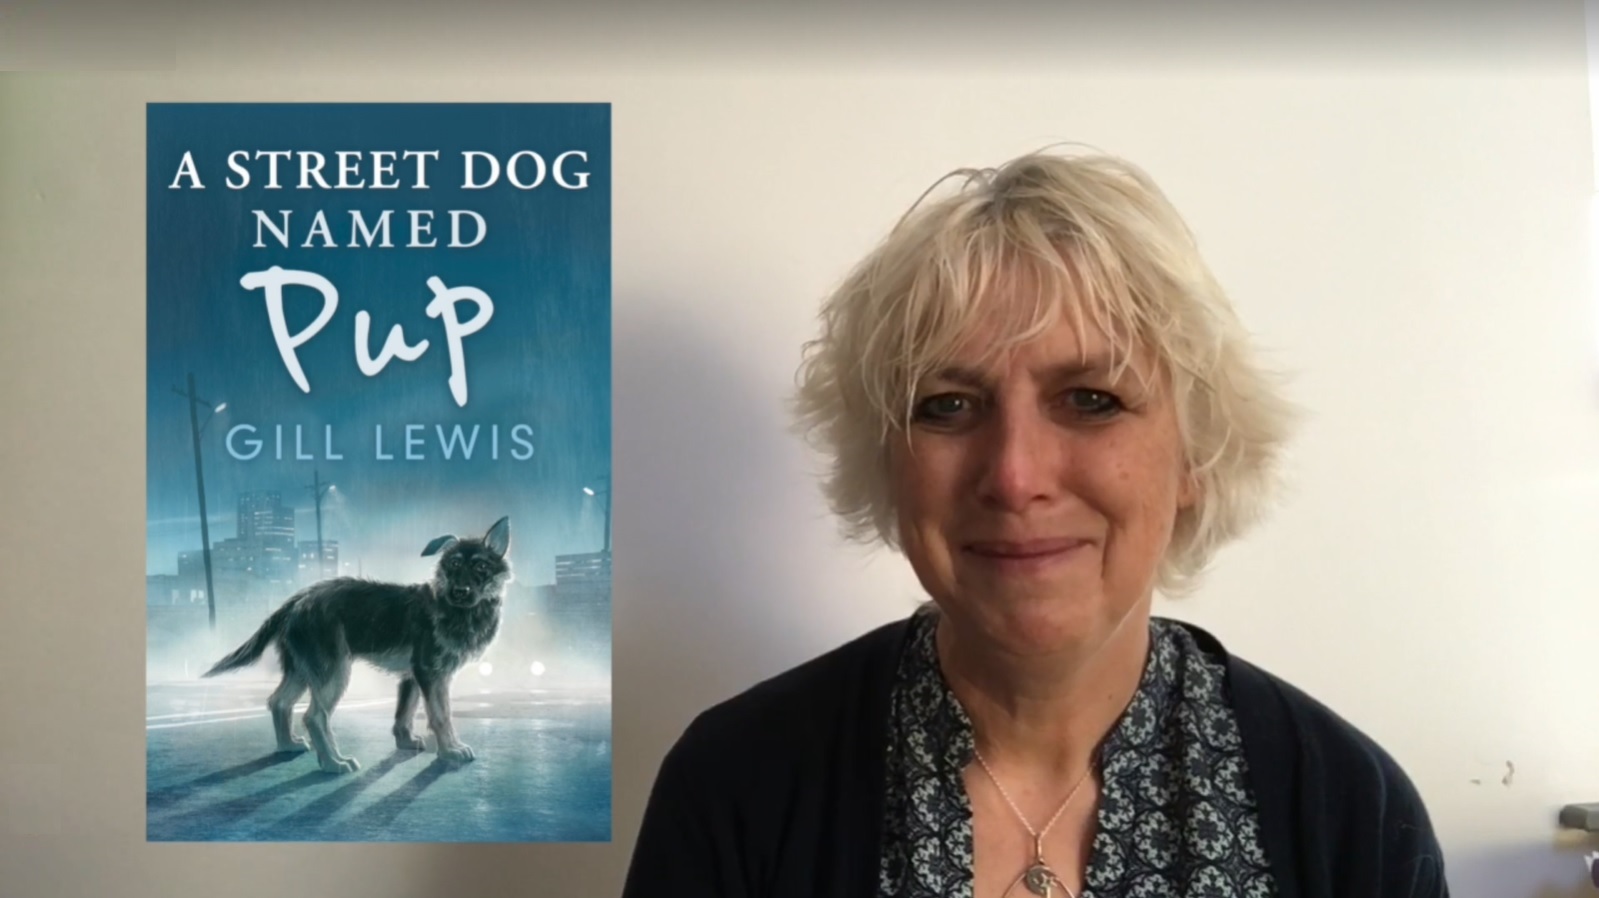 Gill Lewis introduces A Street Dog Named Pup